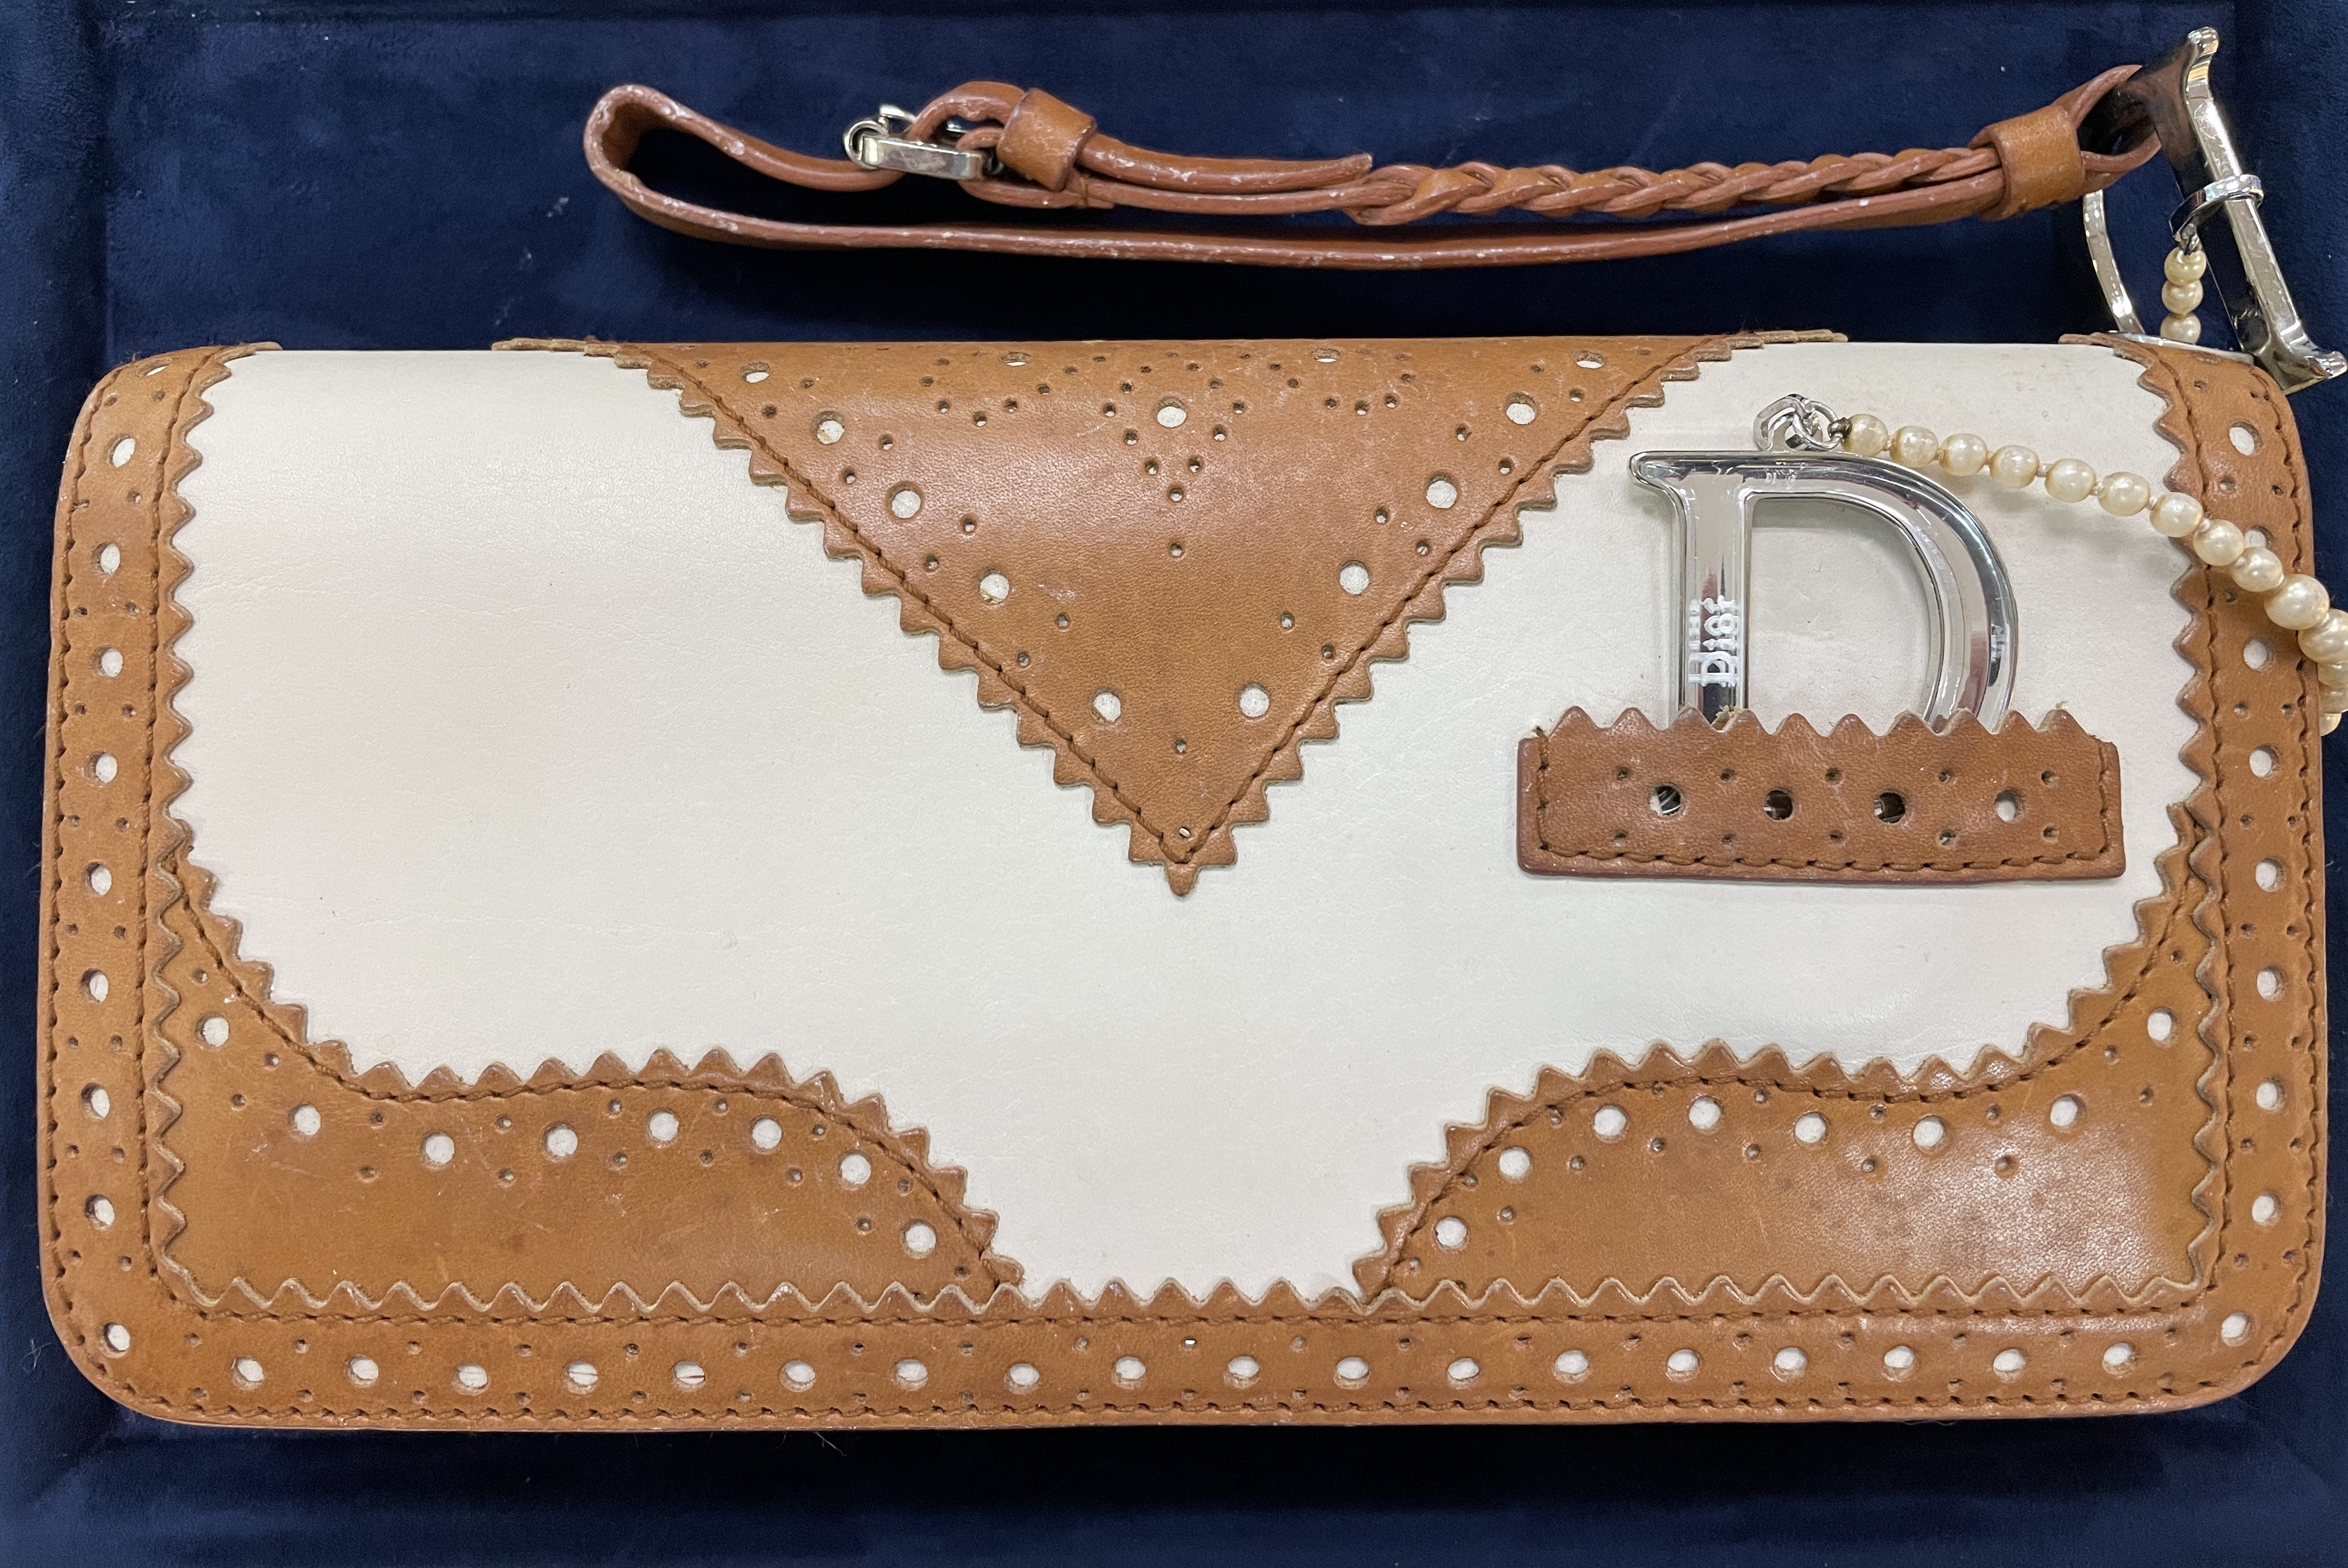 A CHRISTIAN DIOR 'D' TRICK BAG WITH FAUX PEARLS - Image 7 of 22